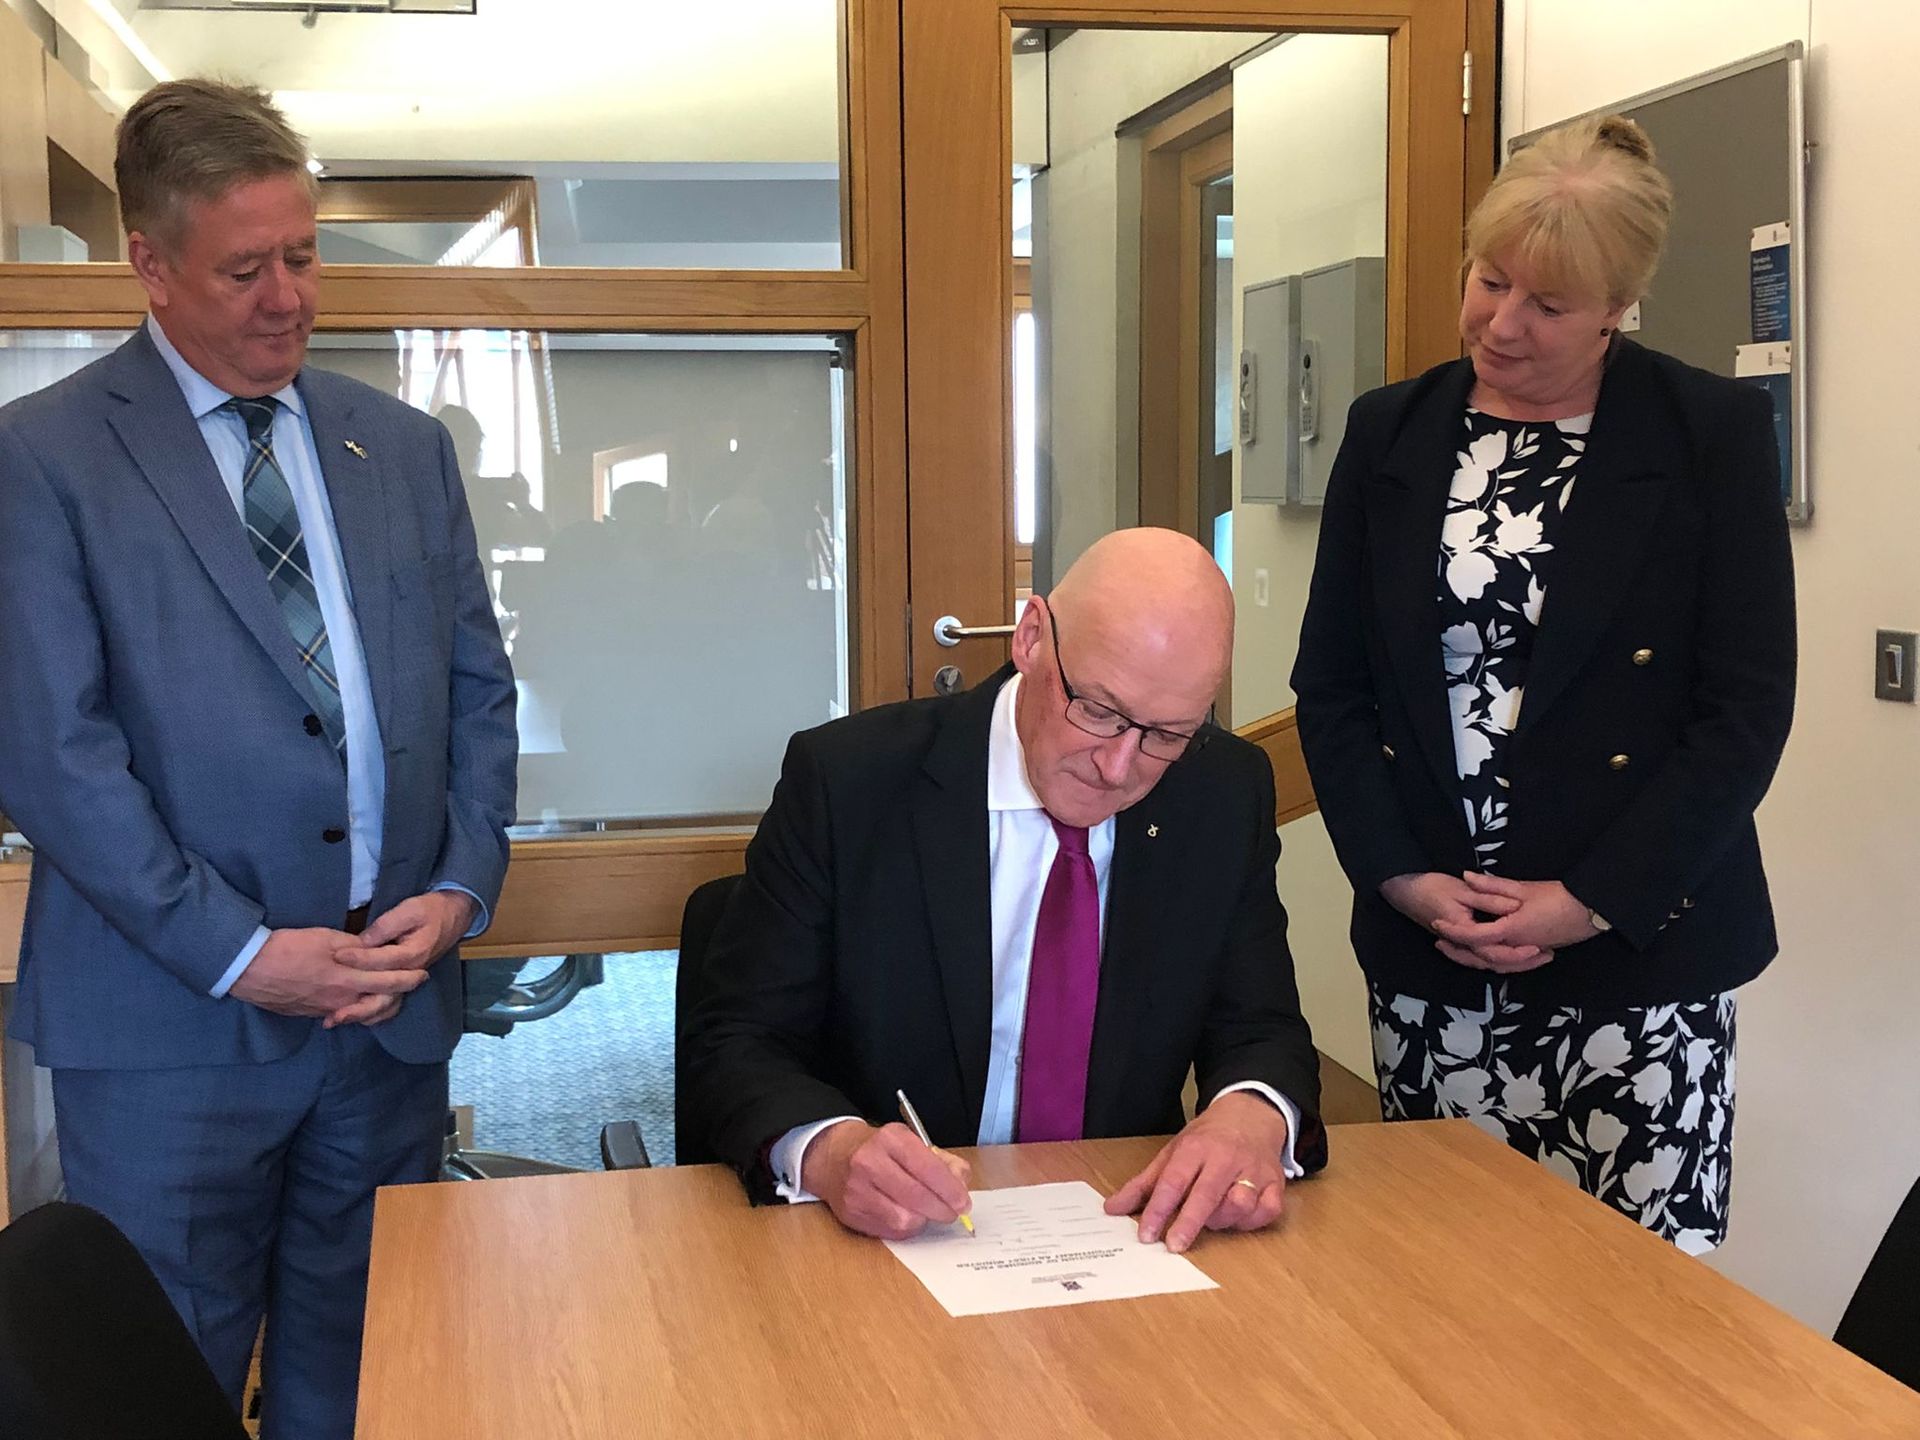 John Swinney signs nomination to be first minister alongside Keith Brown and Shona Robison.